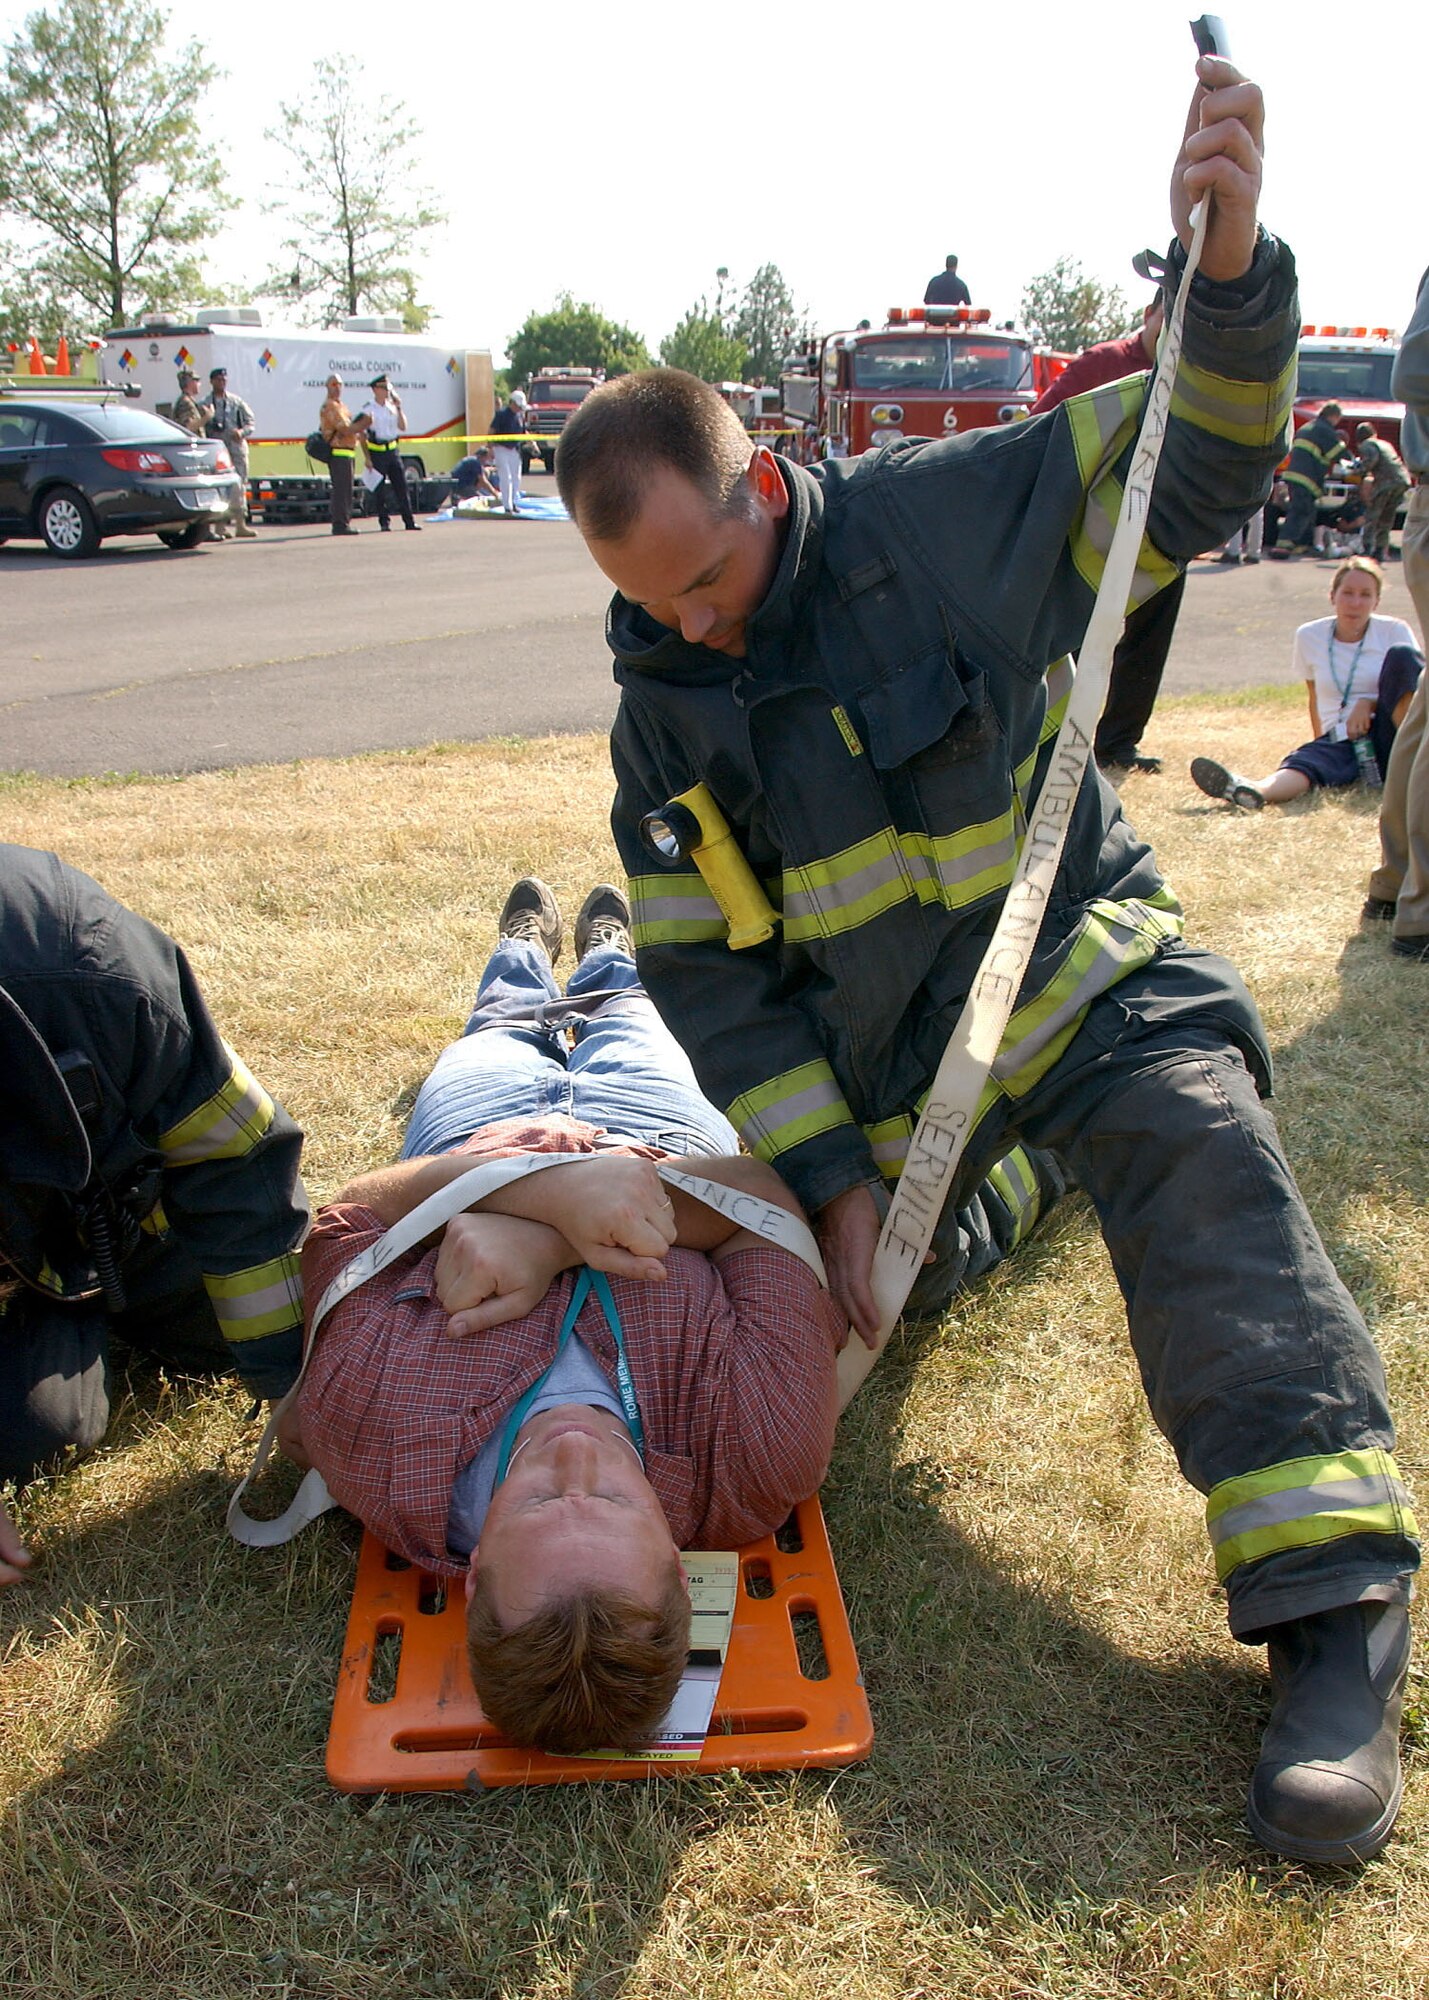 A Rome Fire Department firefighter works to stabilize Northeast Air Defense Sector simulated victim during the Griffiss Park Mass Casualty Exercise Thursday. The exercise challenged first responders to perform their triage and hazmat procedures on victims of a simulated terrorist attack.  Photo by Senior Airman Ricky Best